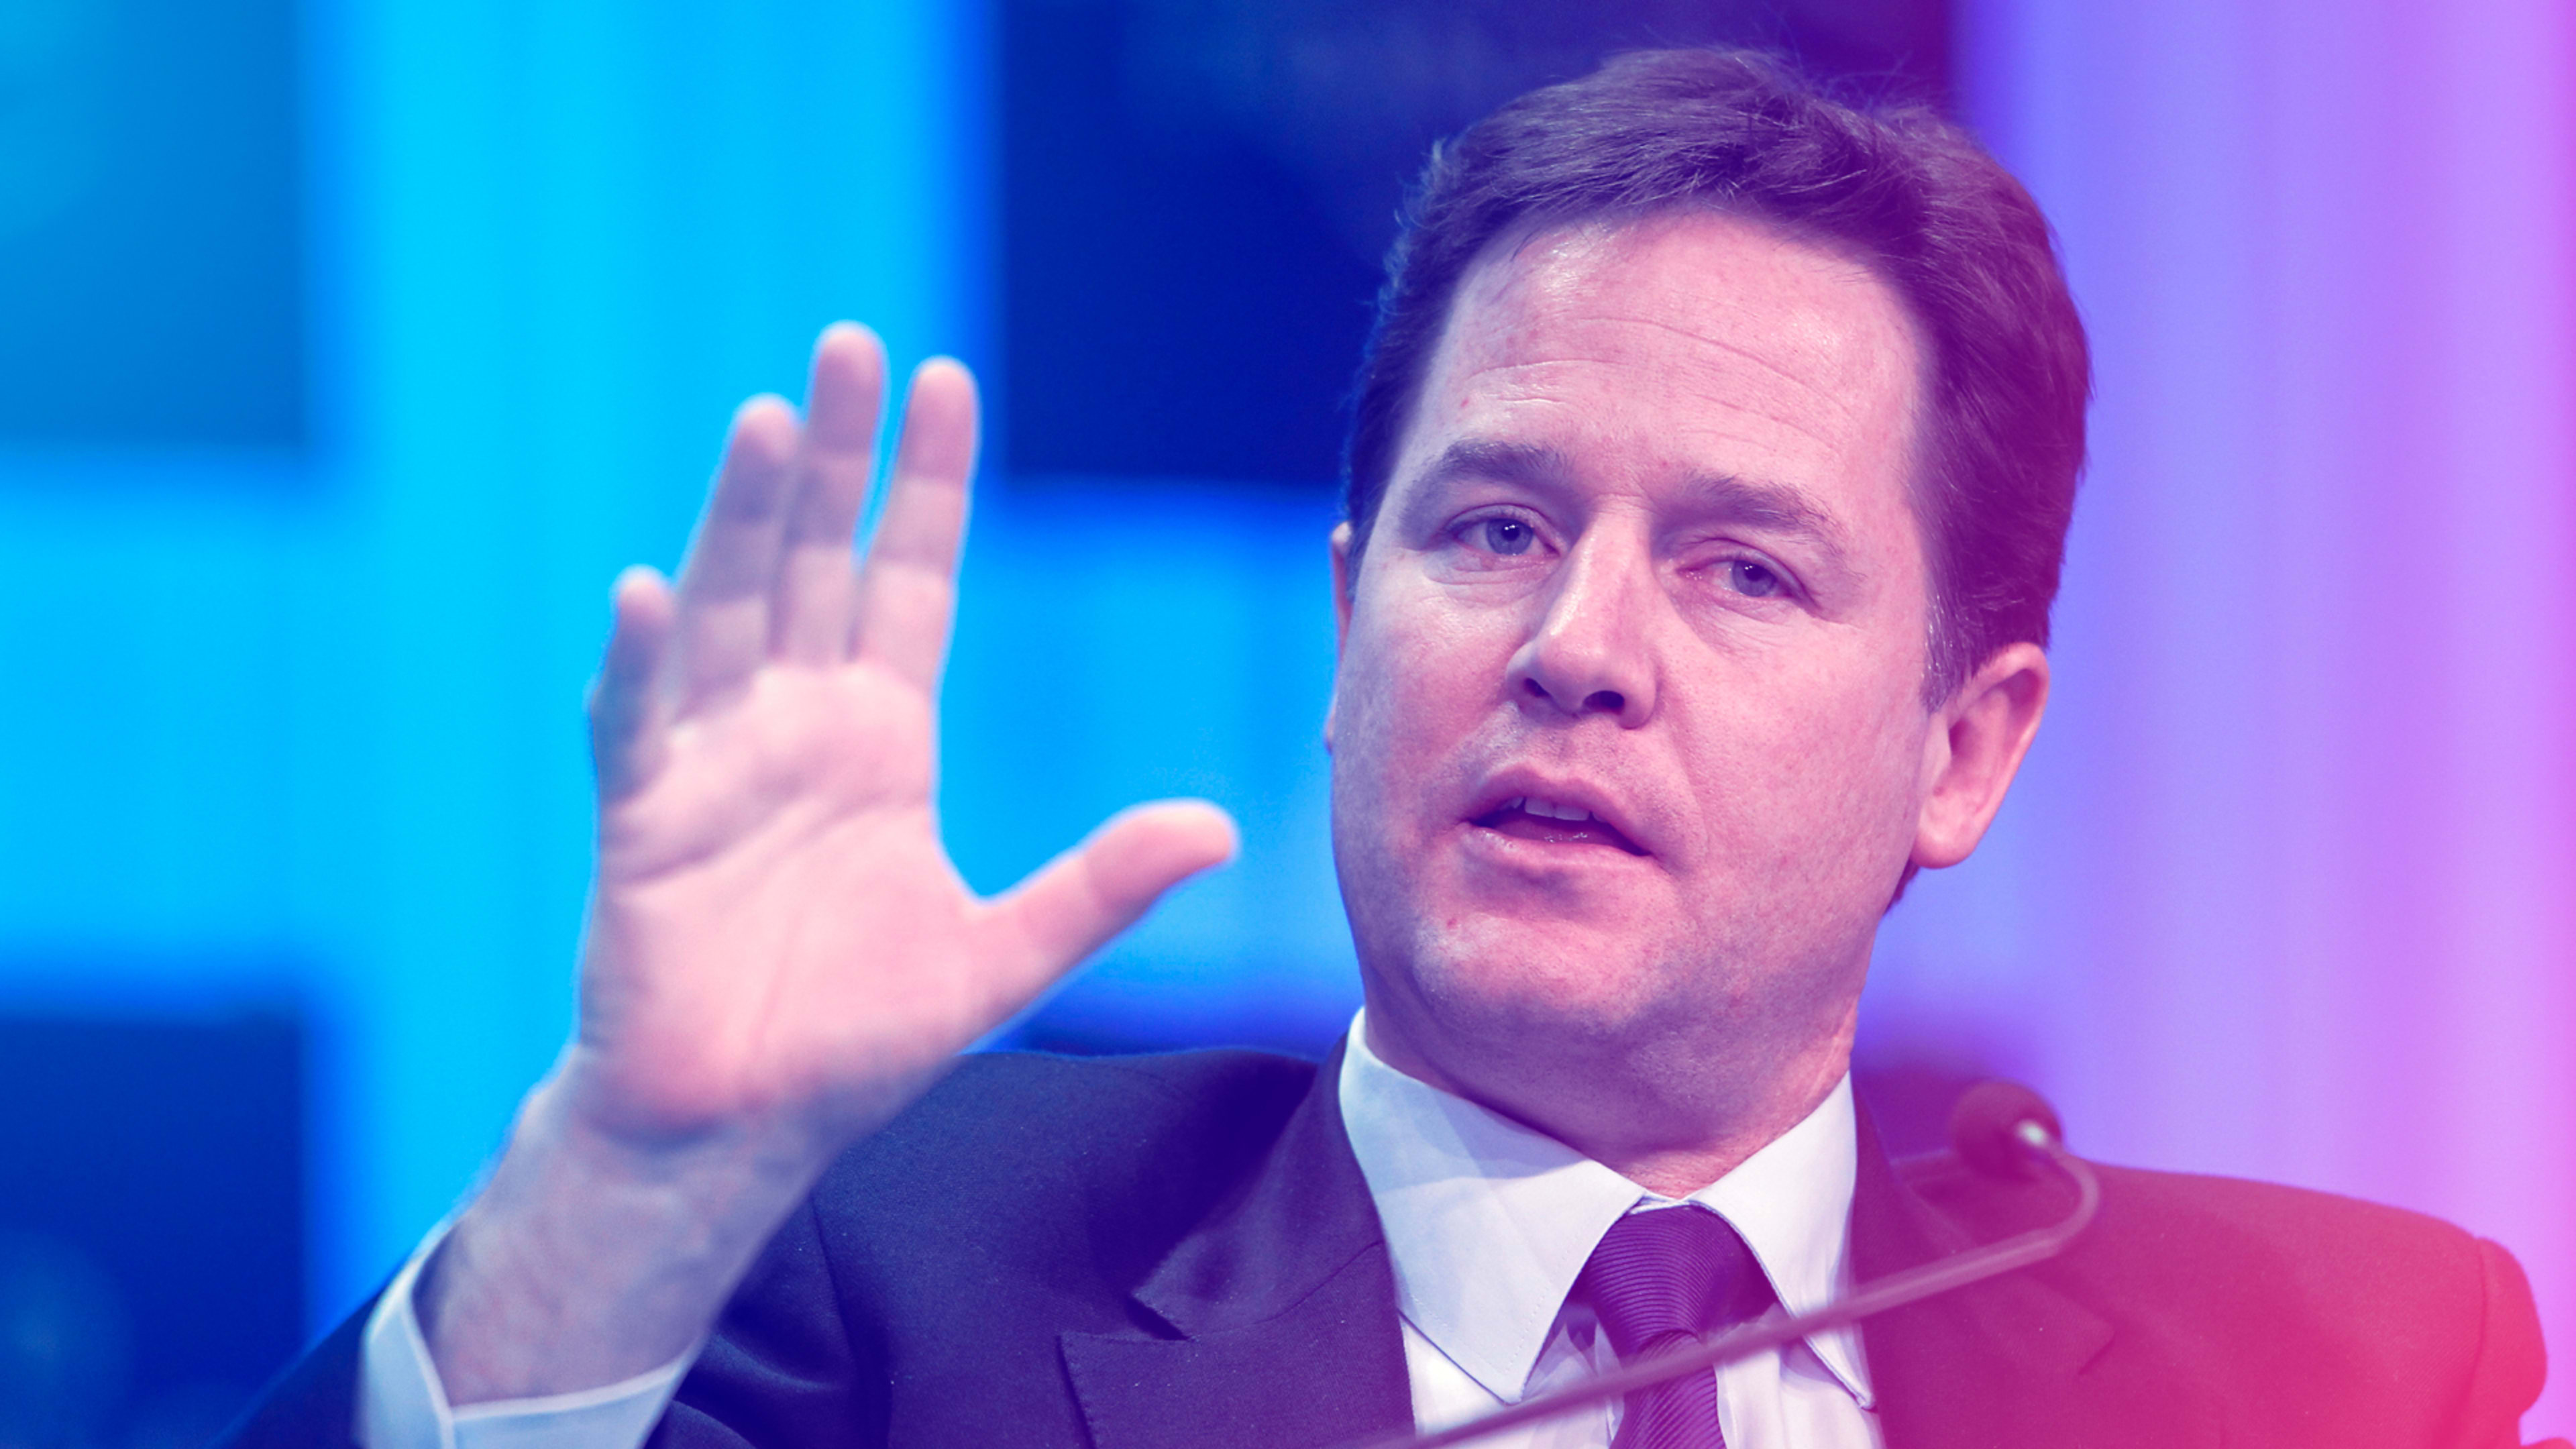 Congratulations to Nick Clegg, who just got the world’s worst job